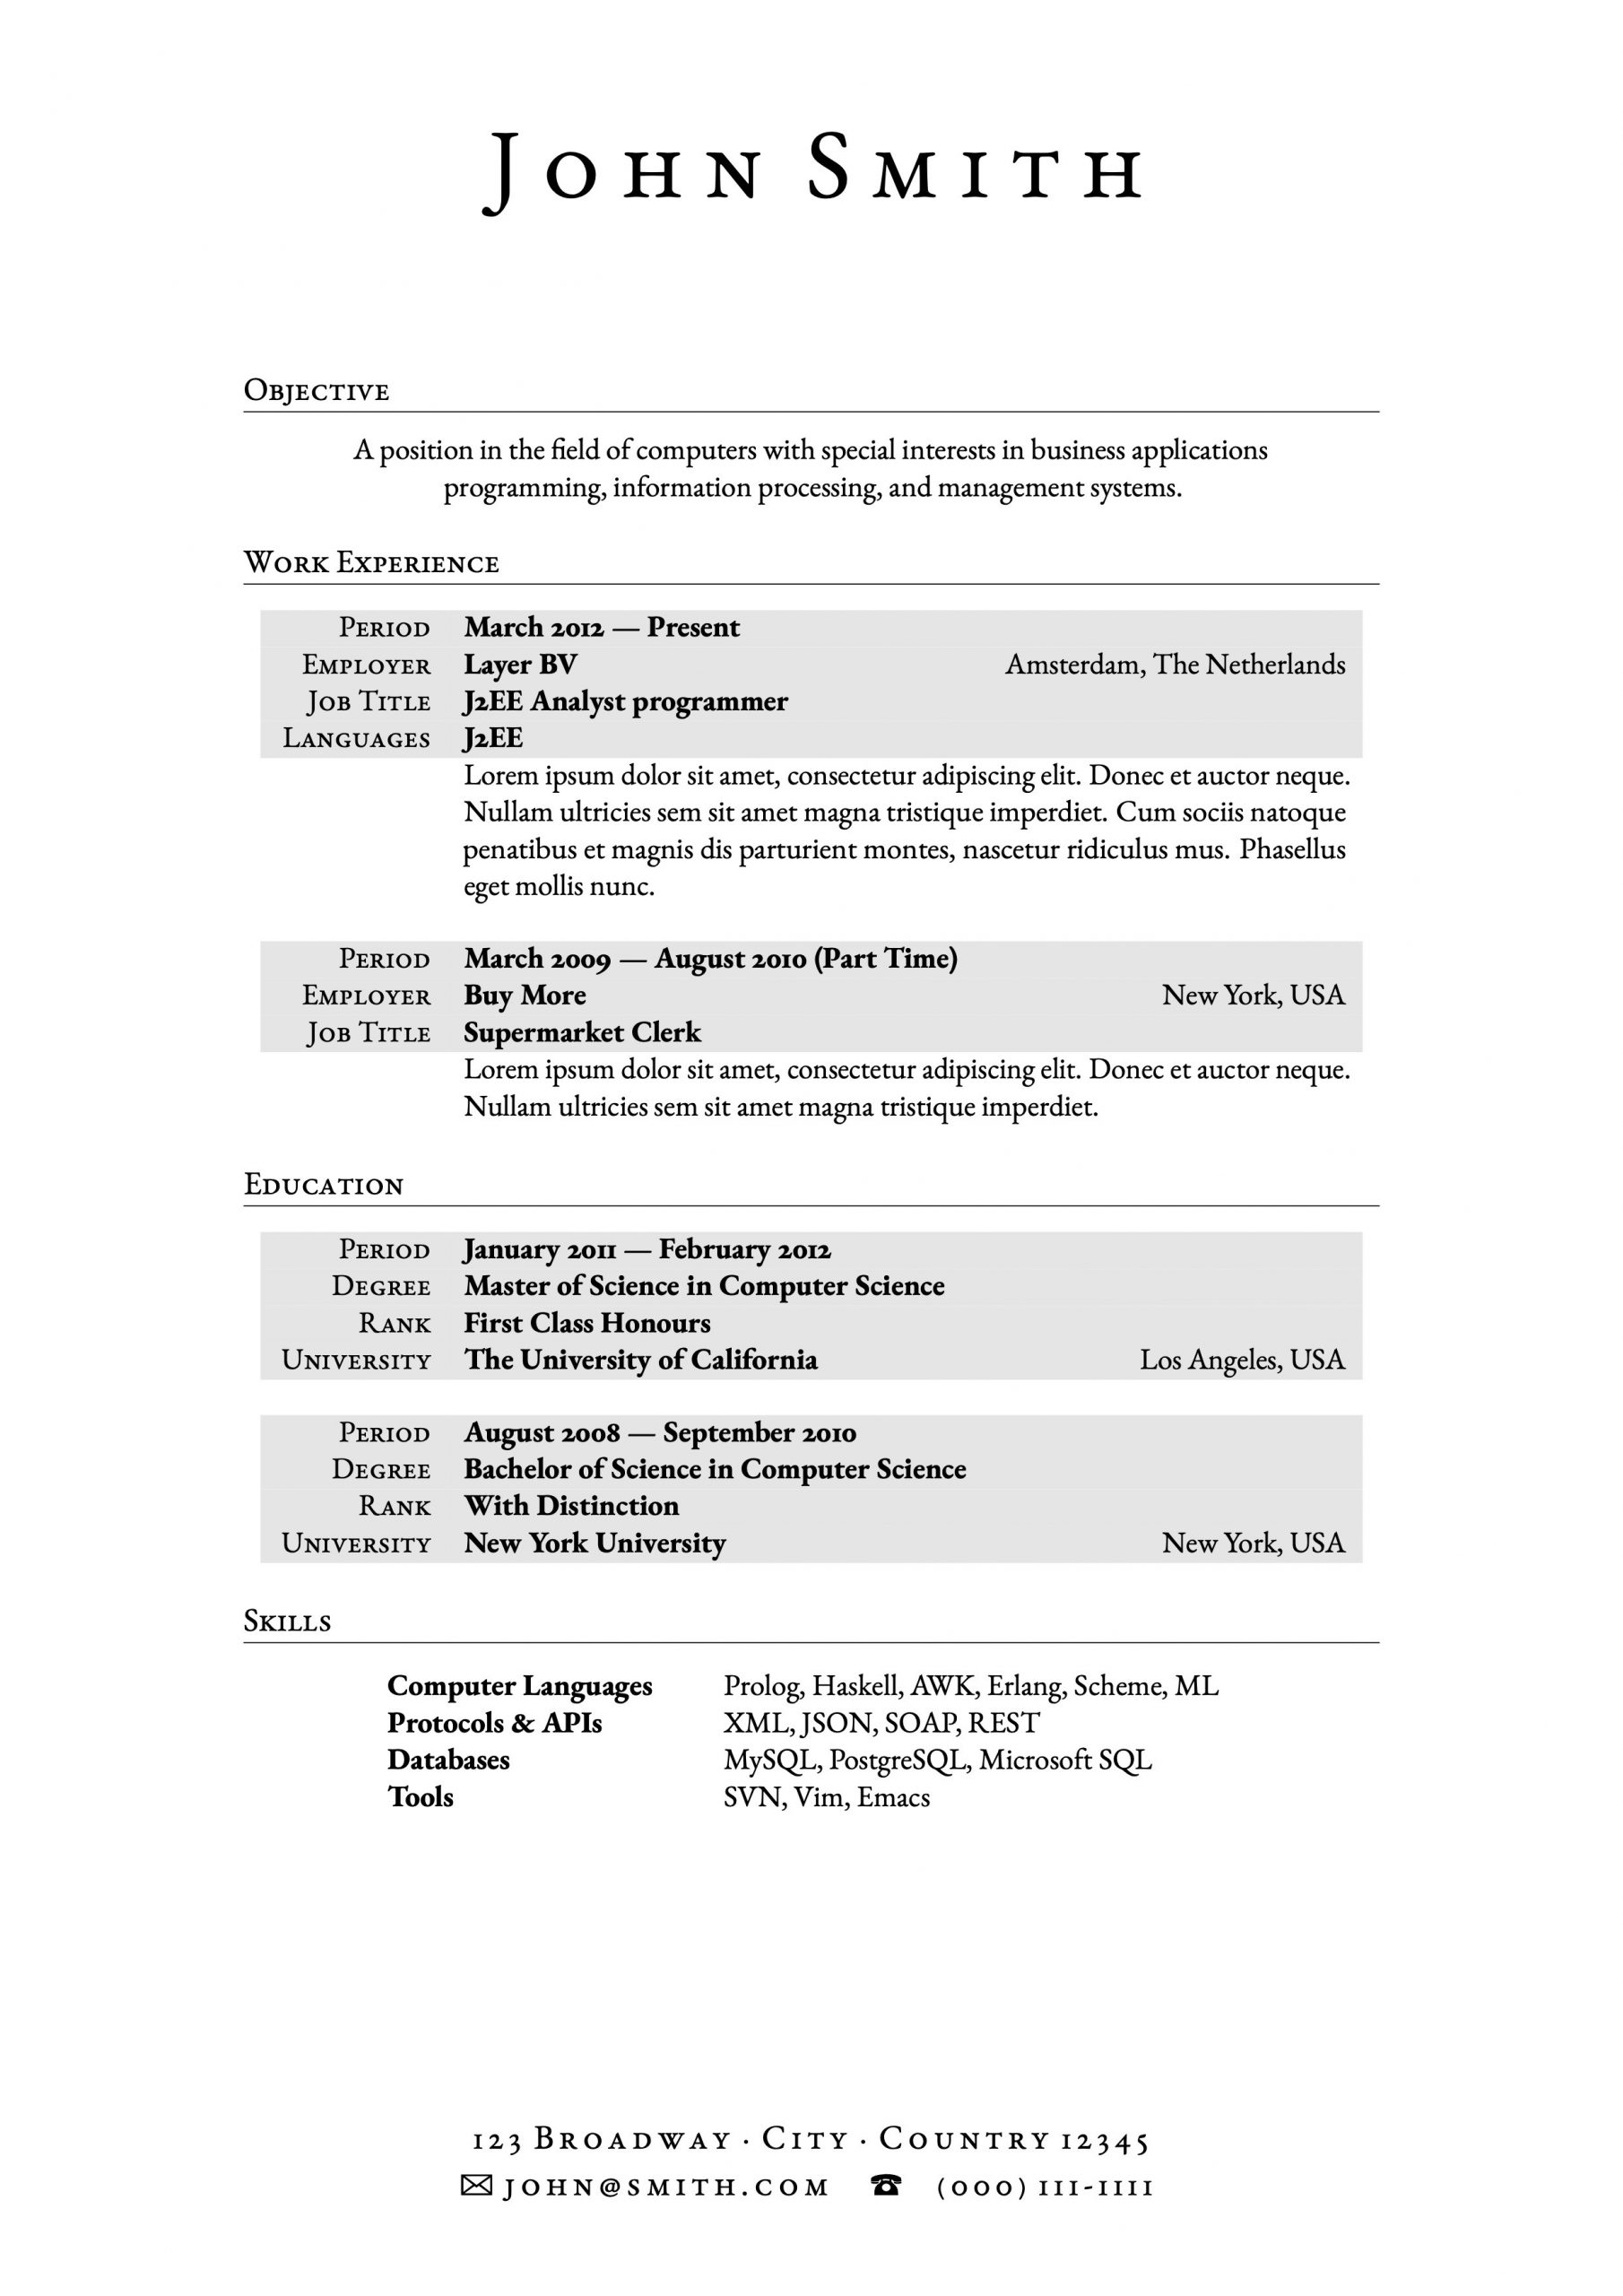 Free Resume Templates for Recent College Graduates Latex Templates – Cvs and Resumes